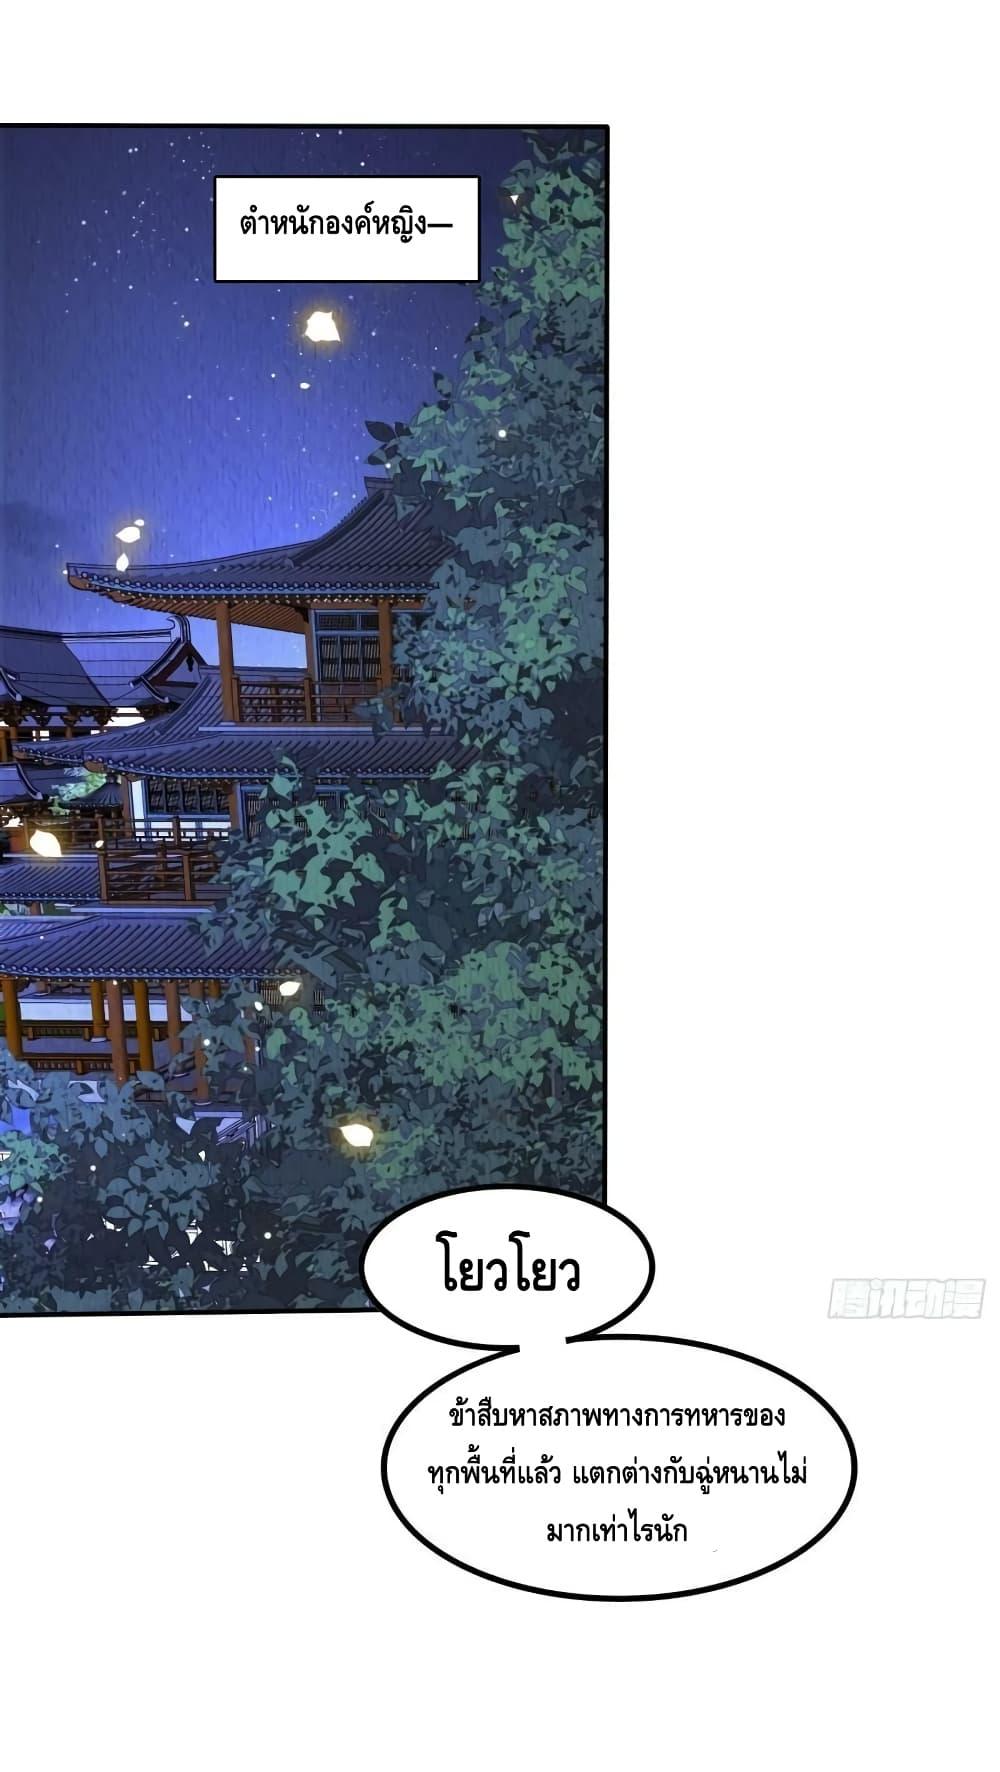 After I Bloom, a Hundred Flowers Will ill – ดอกไม้นับ ตอนที่ 53 (2)